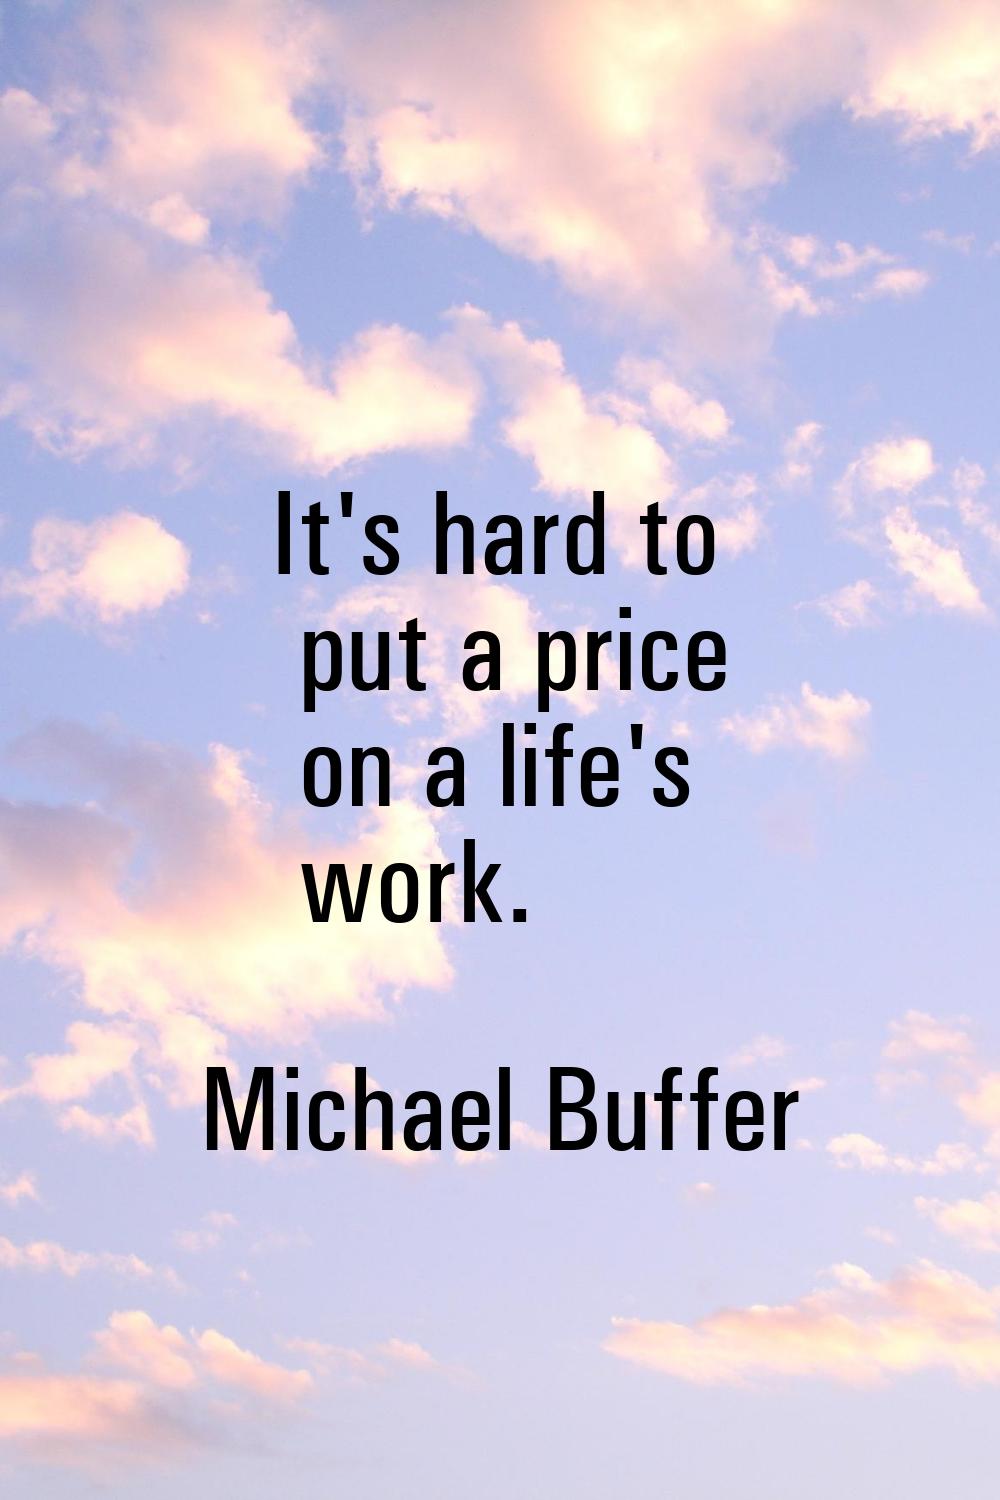 It's hard to put a price on a life's work.